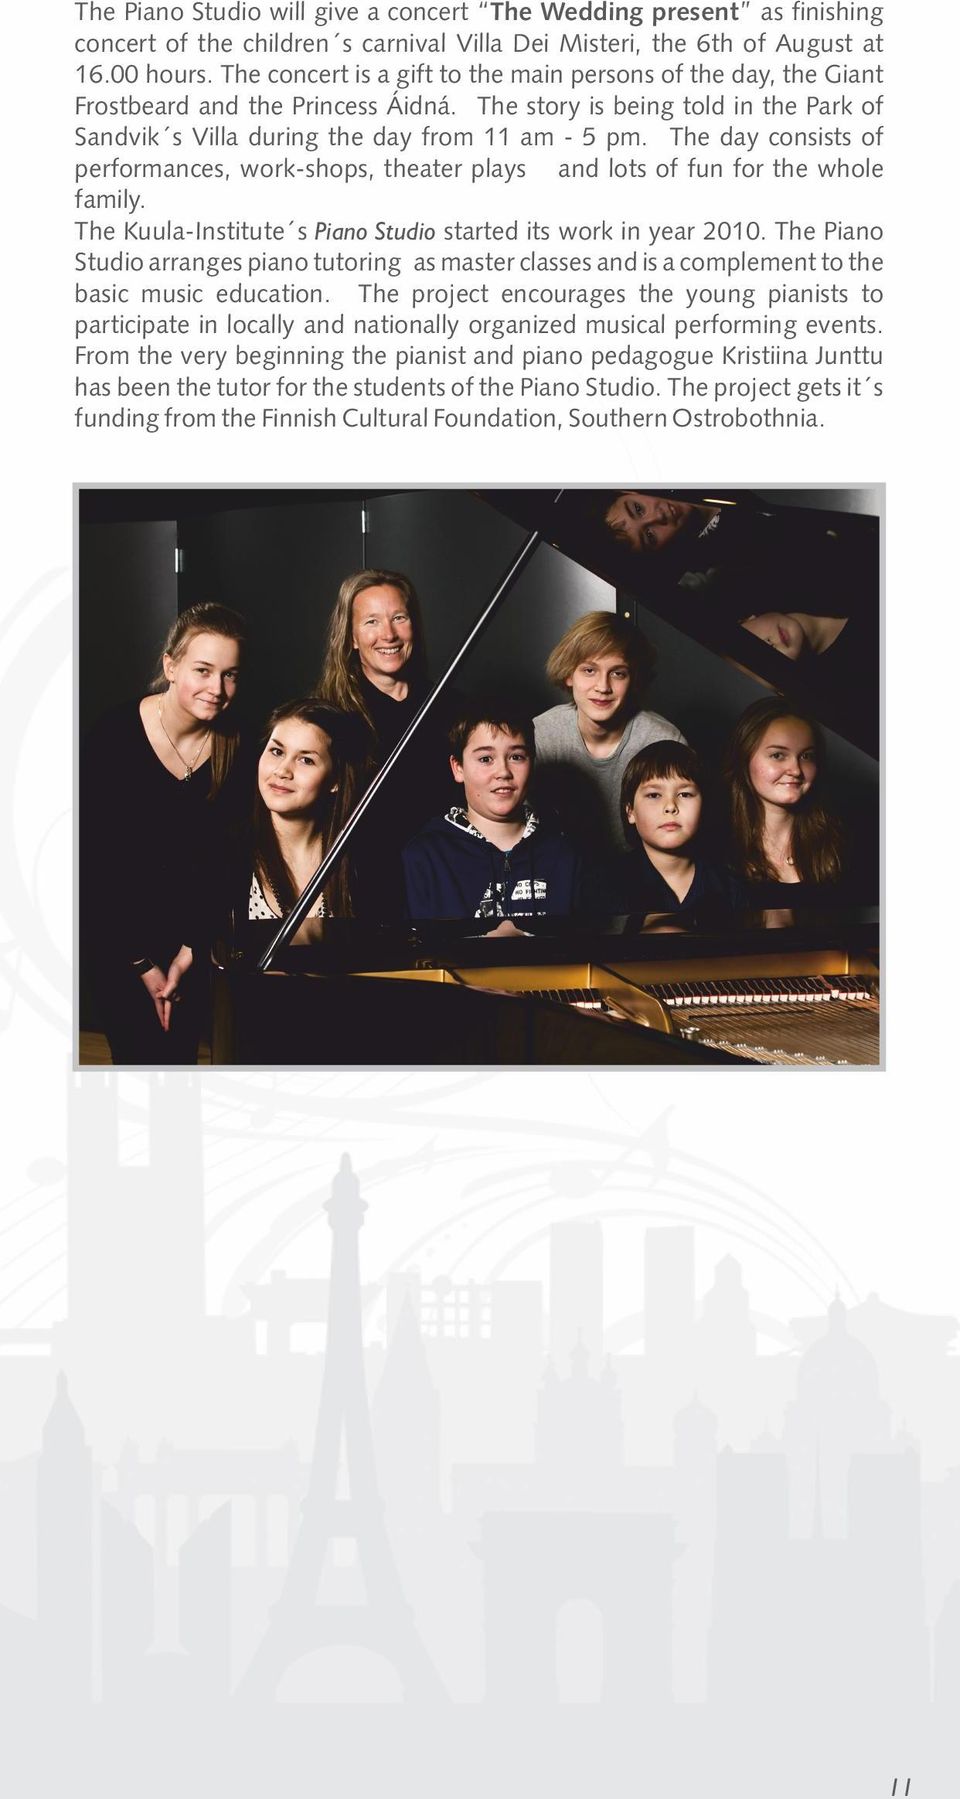 The day consists of performances, work-shops, theater plays and lots of fun for the whole family. The Kuula-Institute s Piano Studio started its work in year 2010.